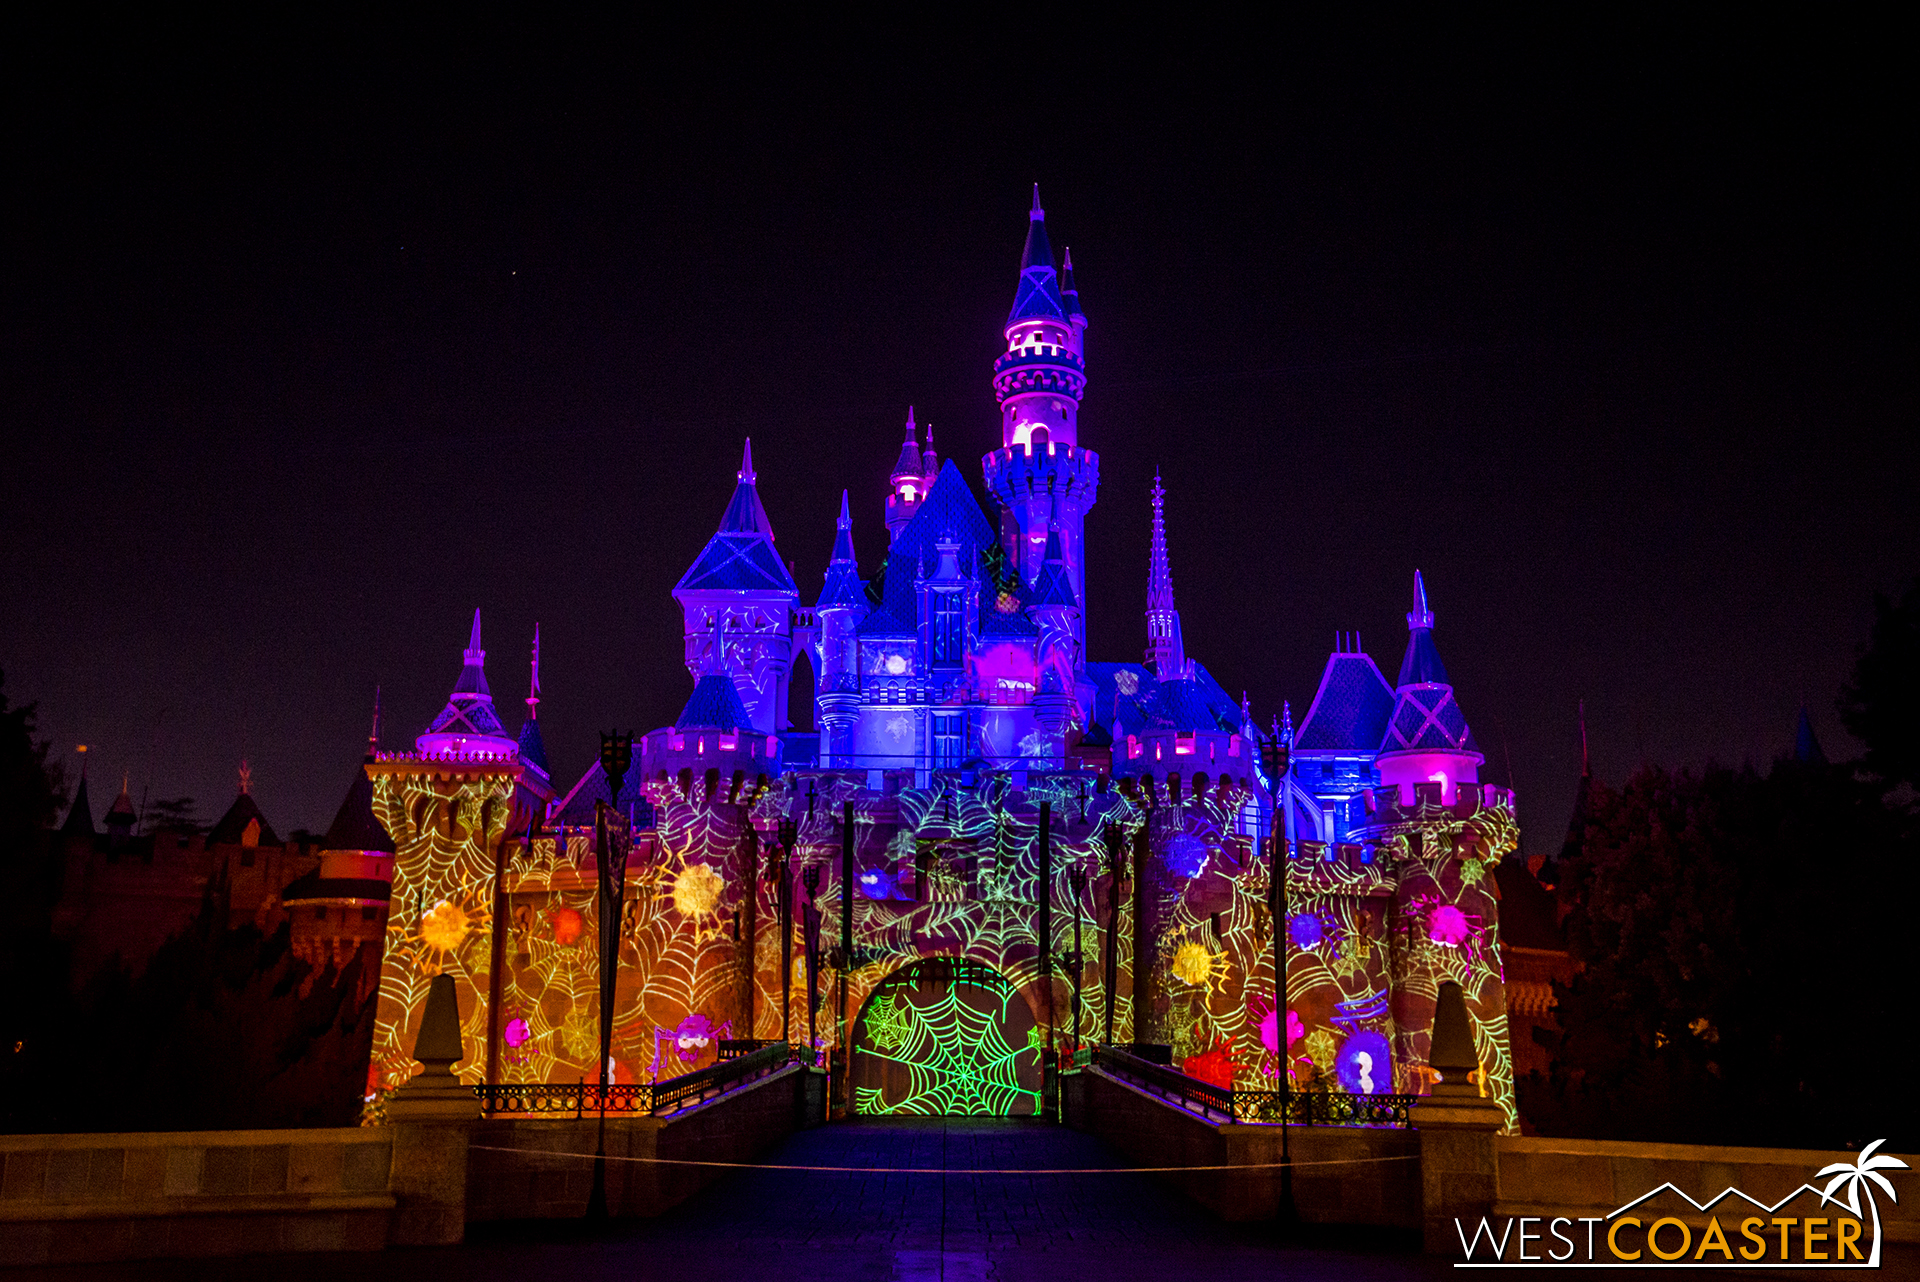  Just as projections shine on the Main Street facades throughout the night, so do they project on Sleeping Beauty Castle too. 